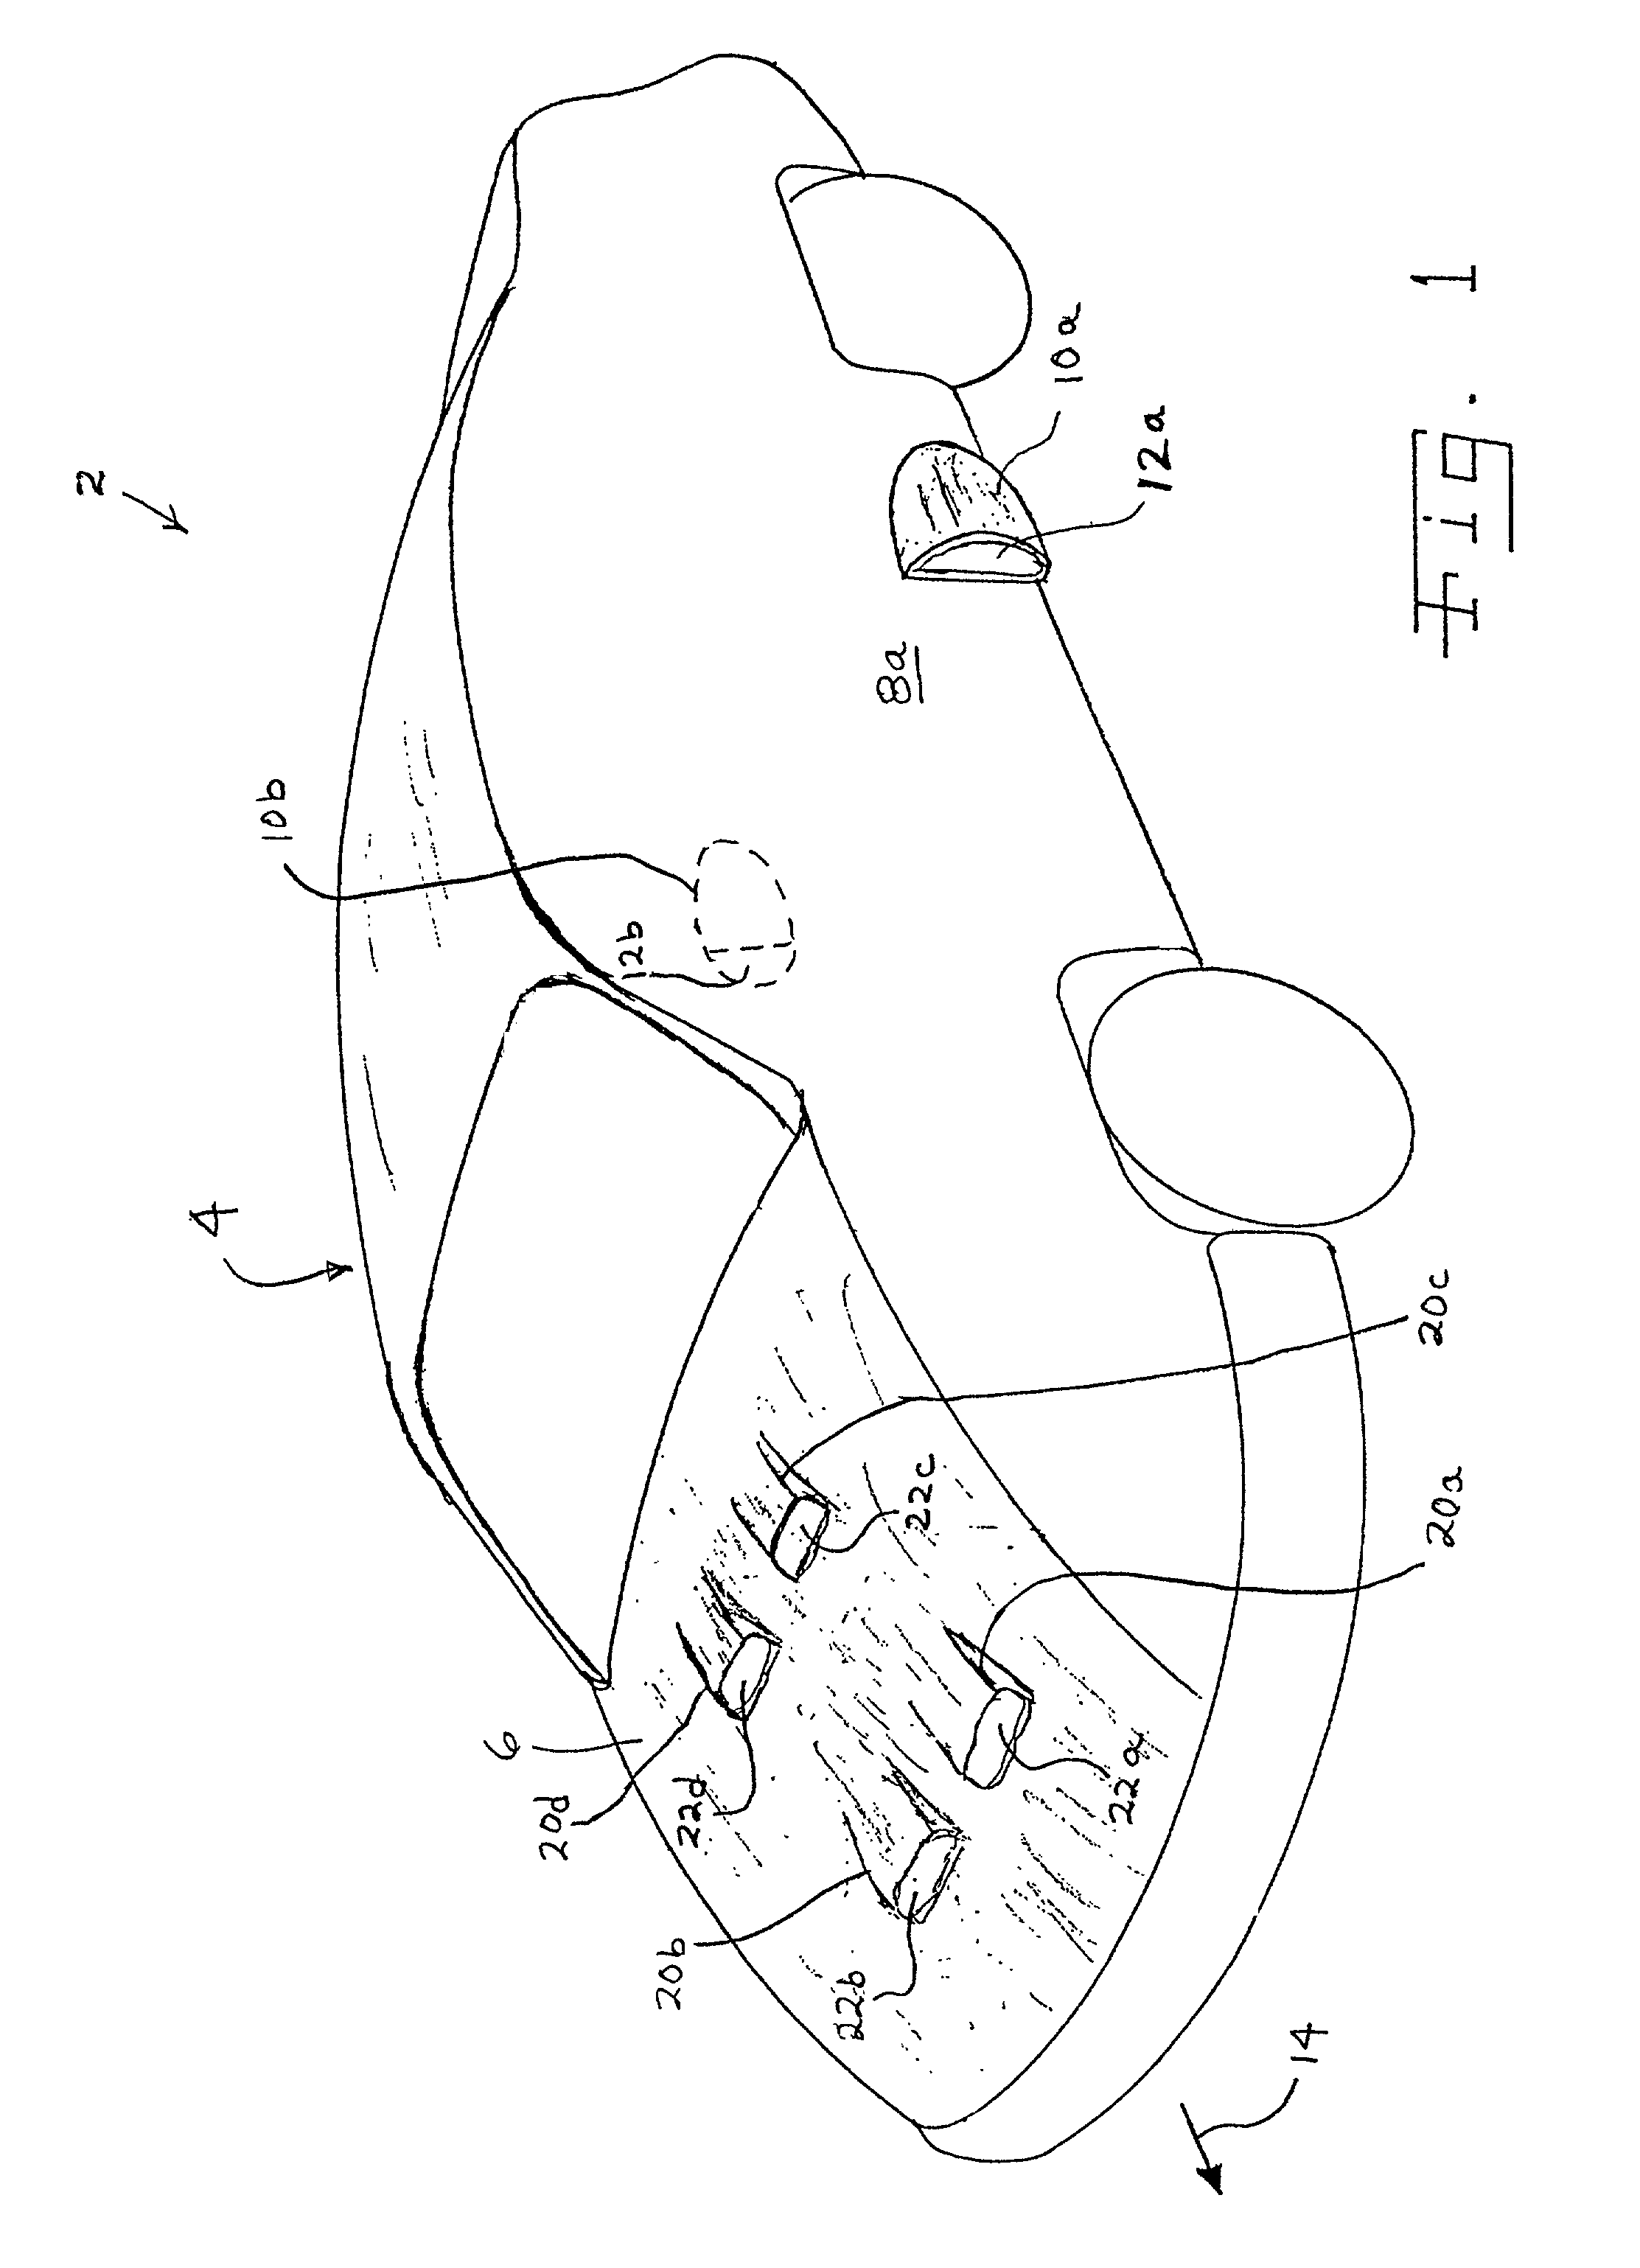 Wind turbine driven generator system for a motor vehicle